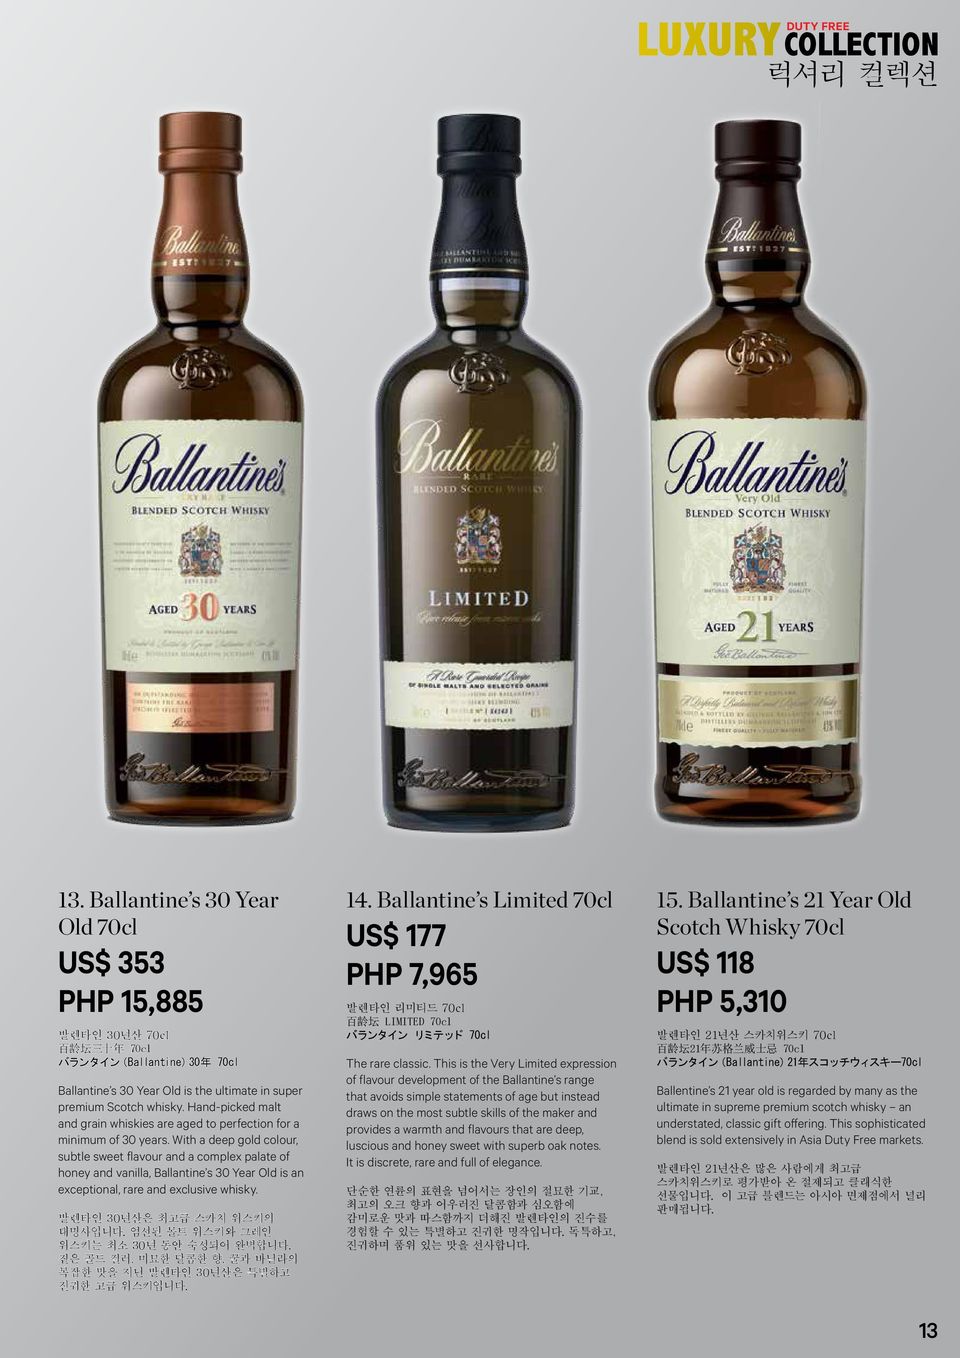 Hand-picked malt and grain whiskies are aged to perfection for a minimum of 30 years.